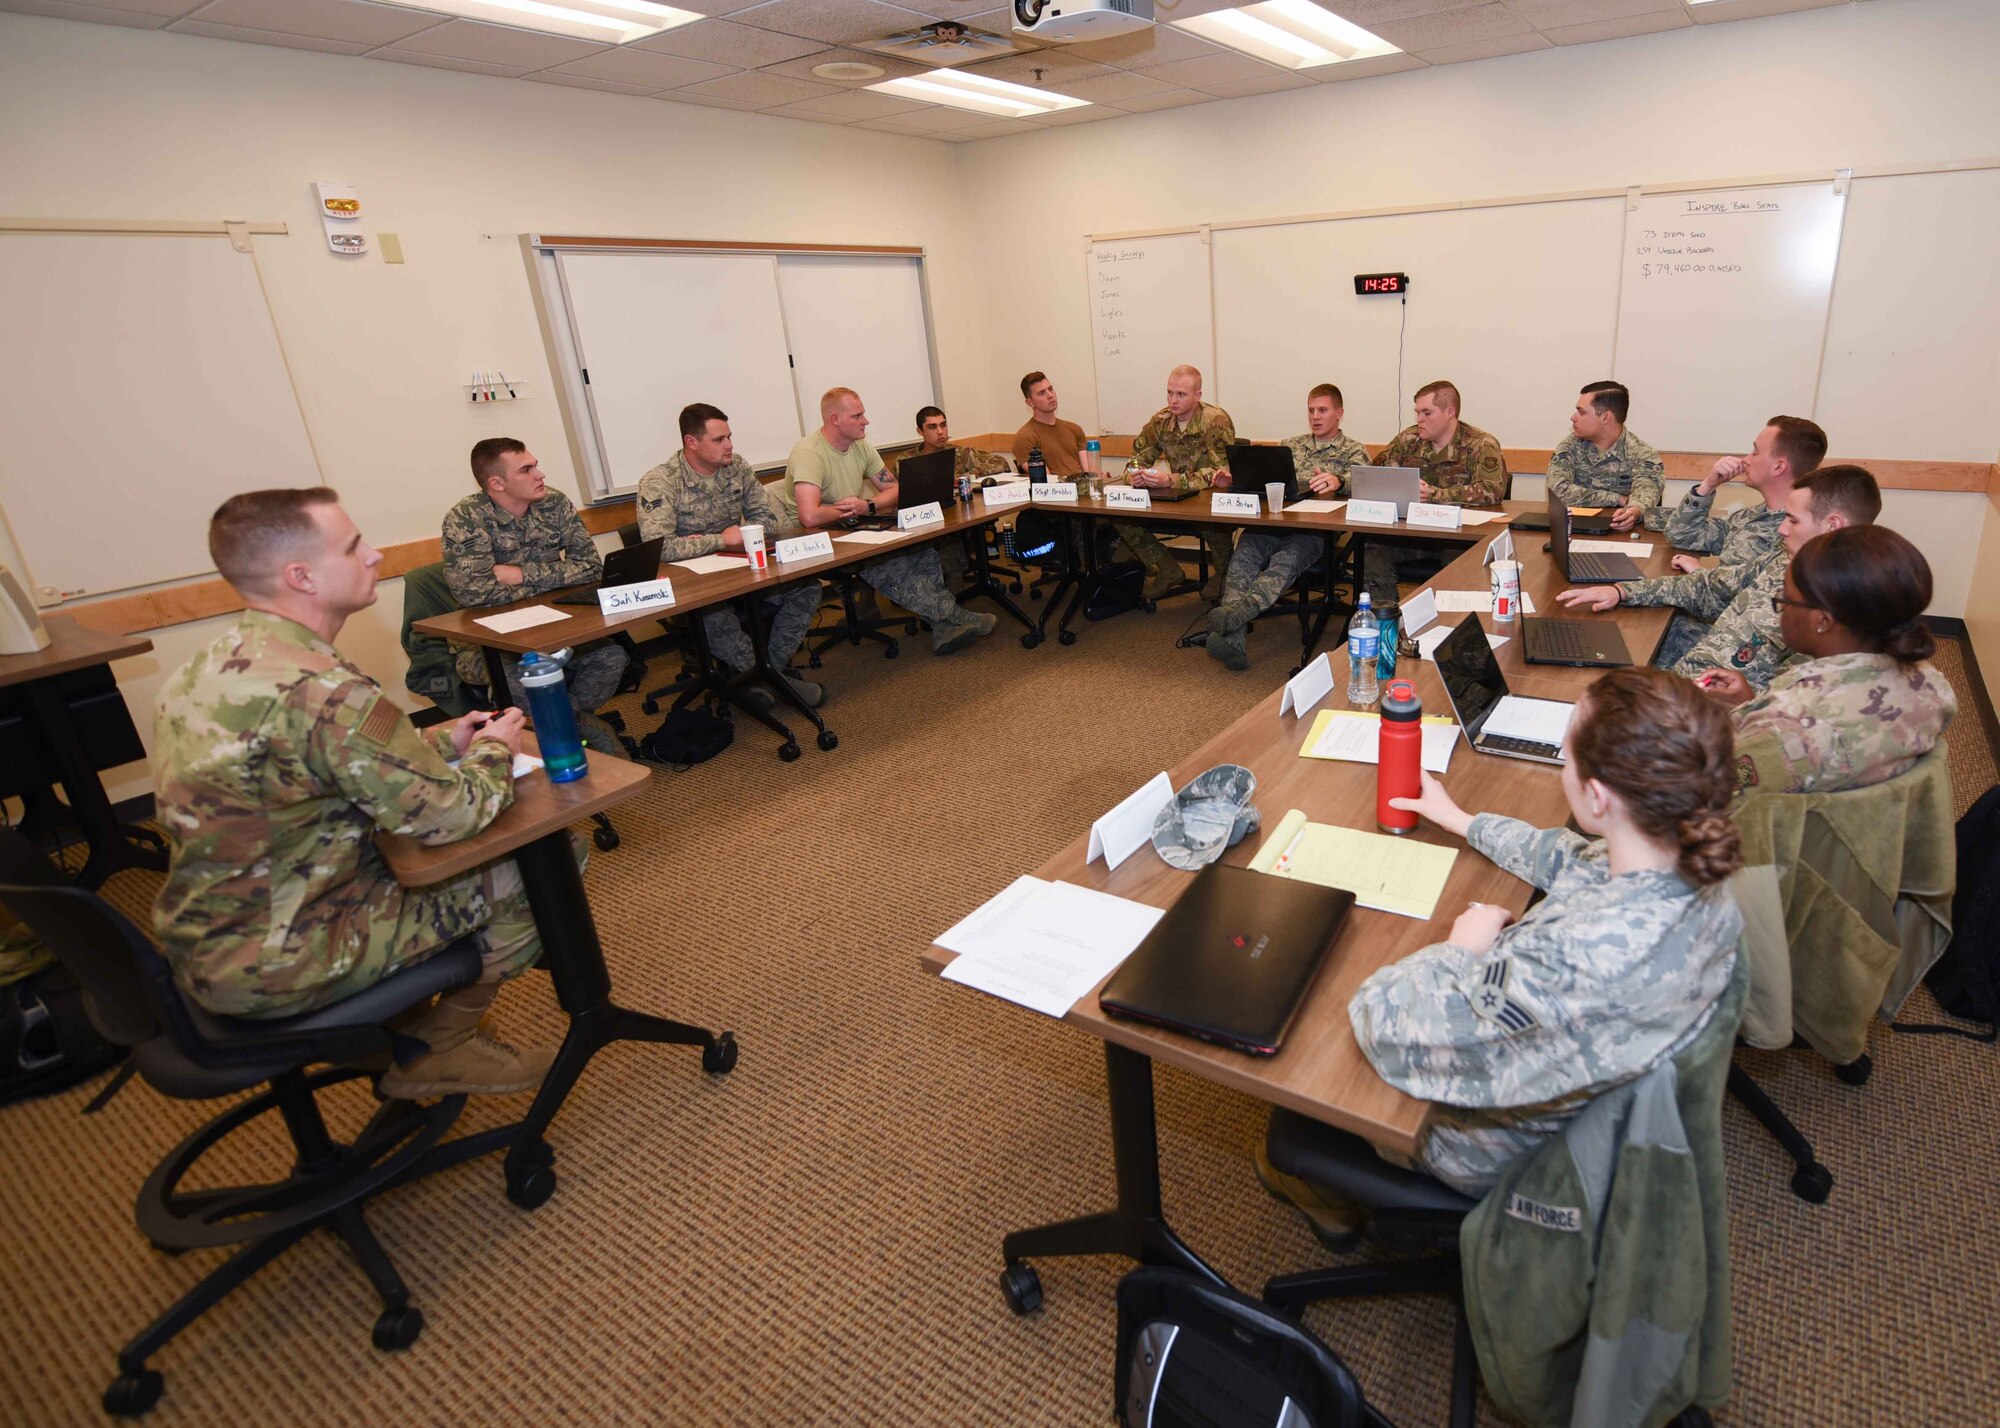 Airmen from the Airman Leadership School, discuss their personal development goals Nov. 19, 2019, at McConnell Air Force Base, Kan. The changes to the ALS curriculum make it more reliant on student research, problem solving and student-led discussions. (U.S. Air Force photo by Airman 1st Class Alexi Bosarge)